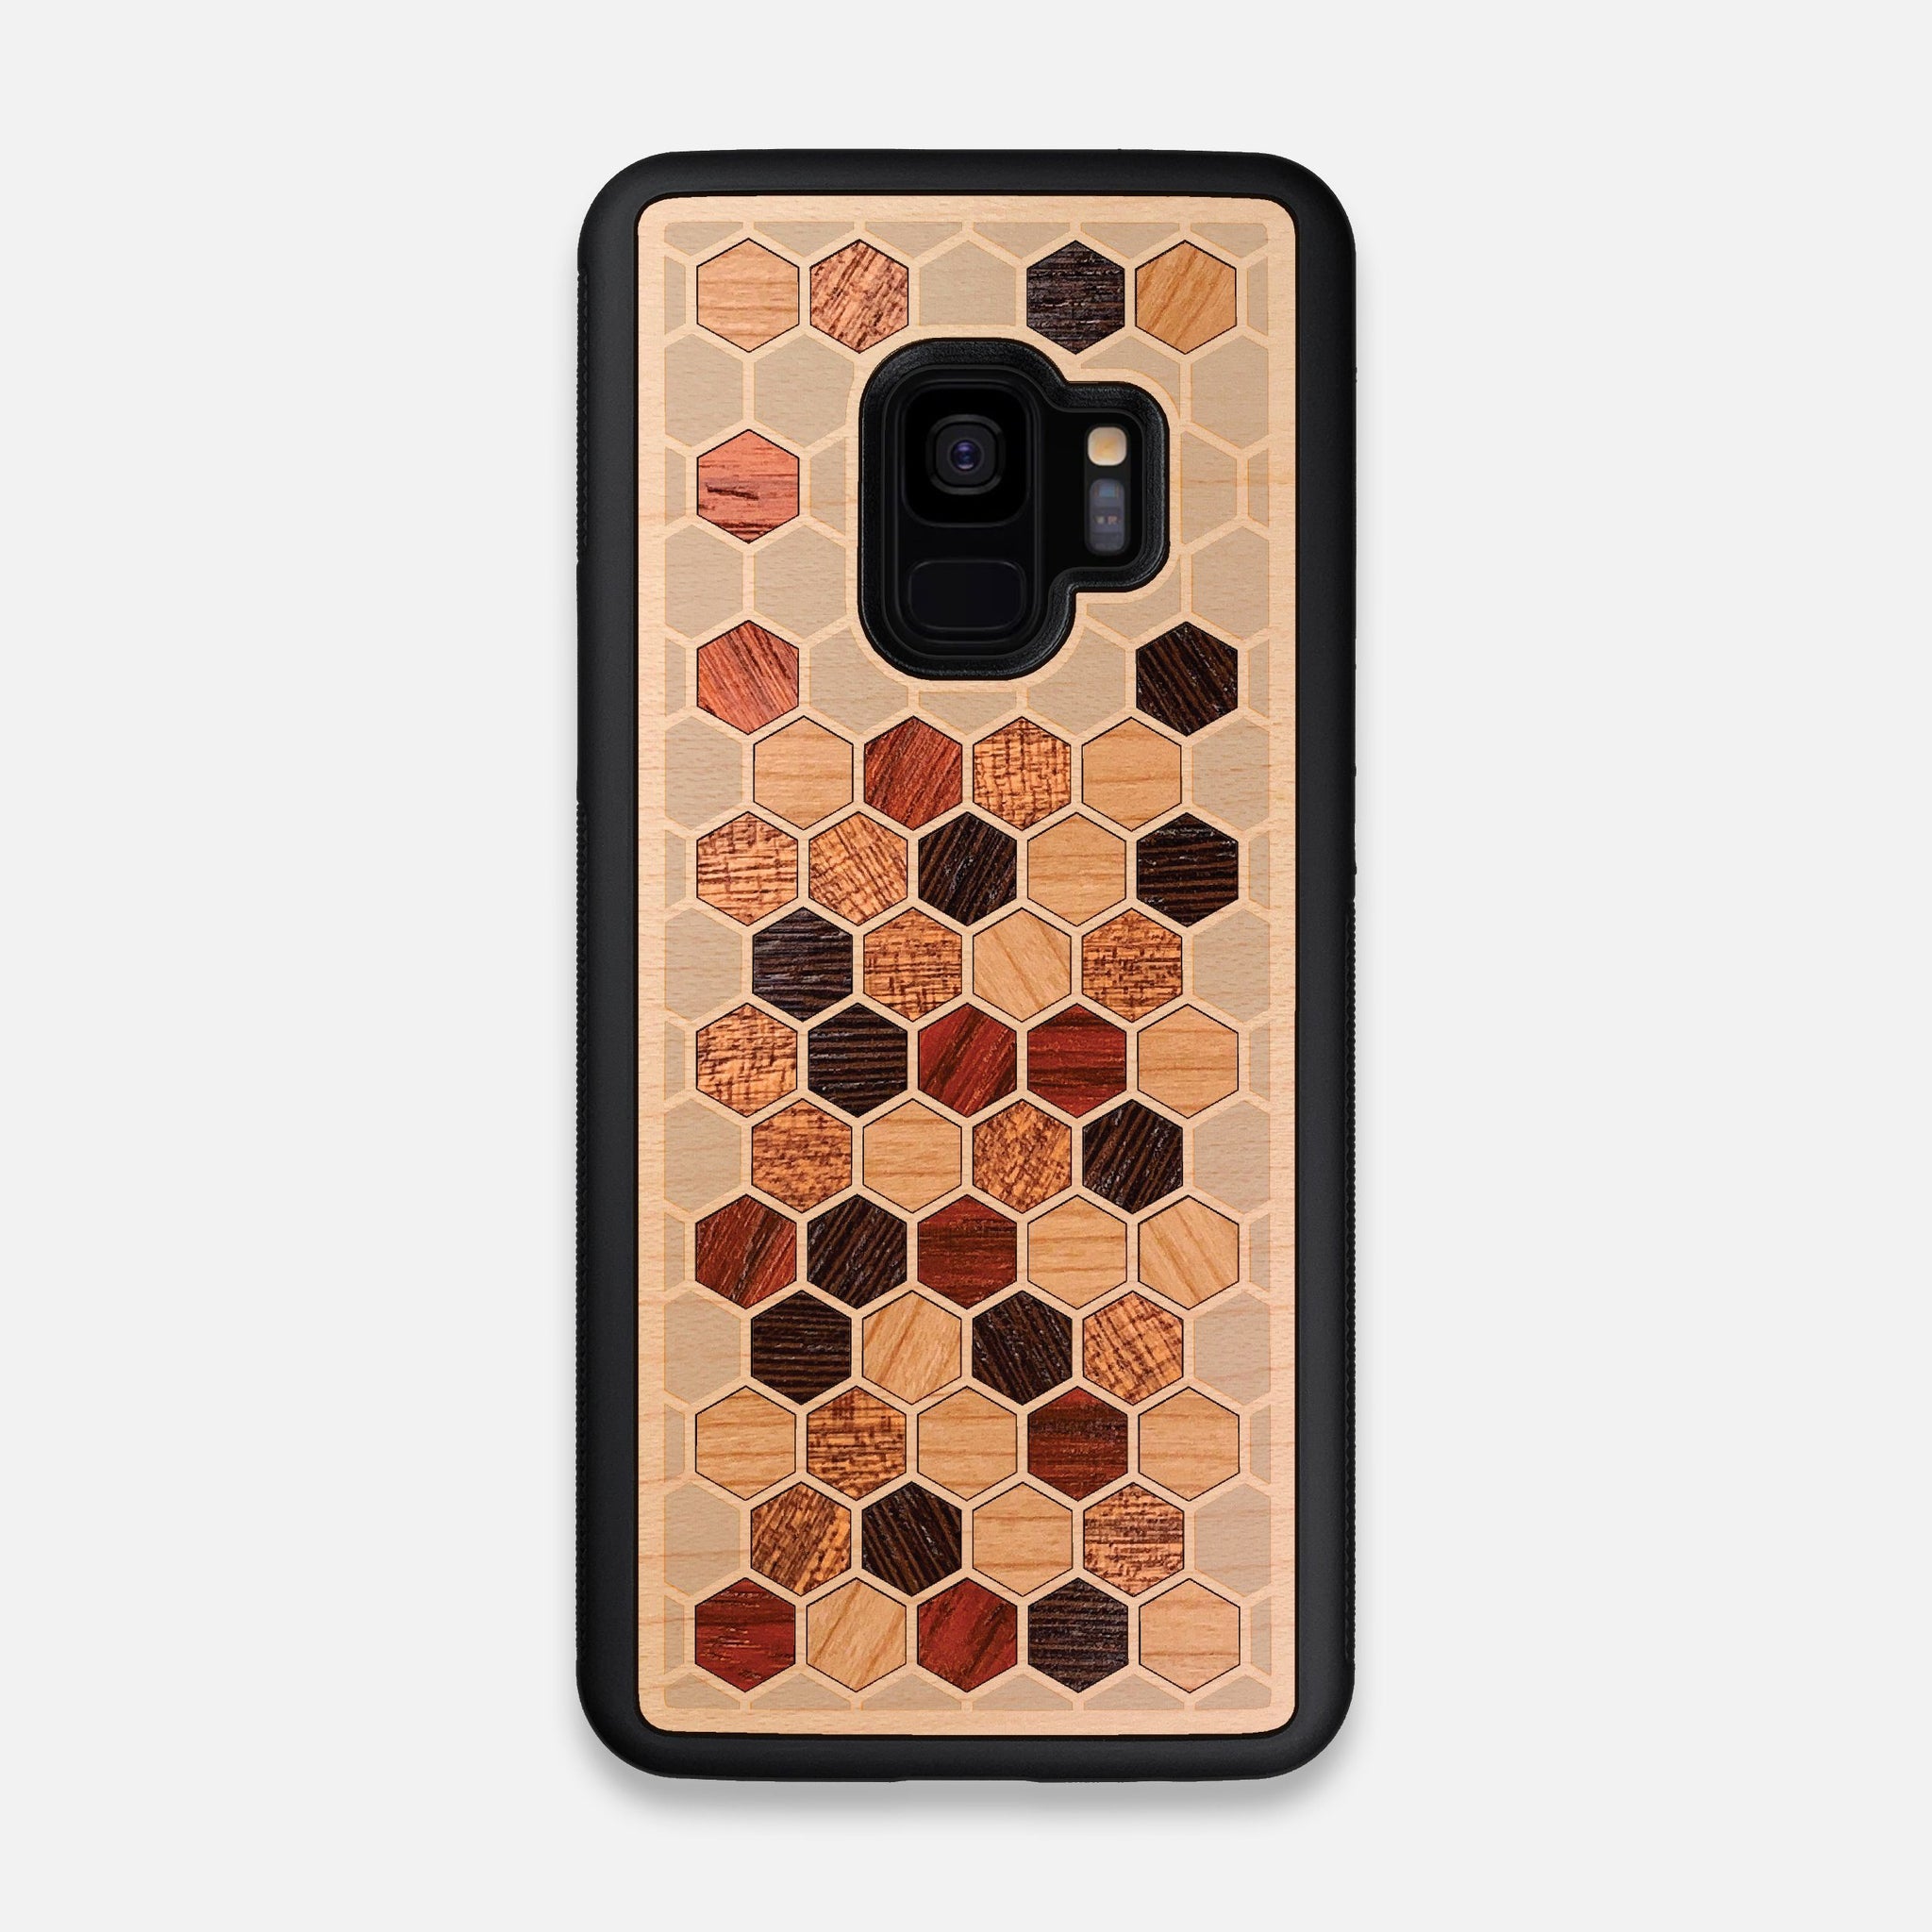 Front view of the Cellular Maple Wood Galaxy S9 Case by Keyway Designs